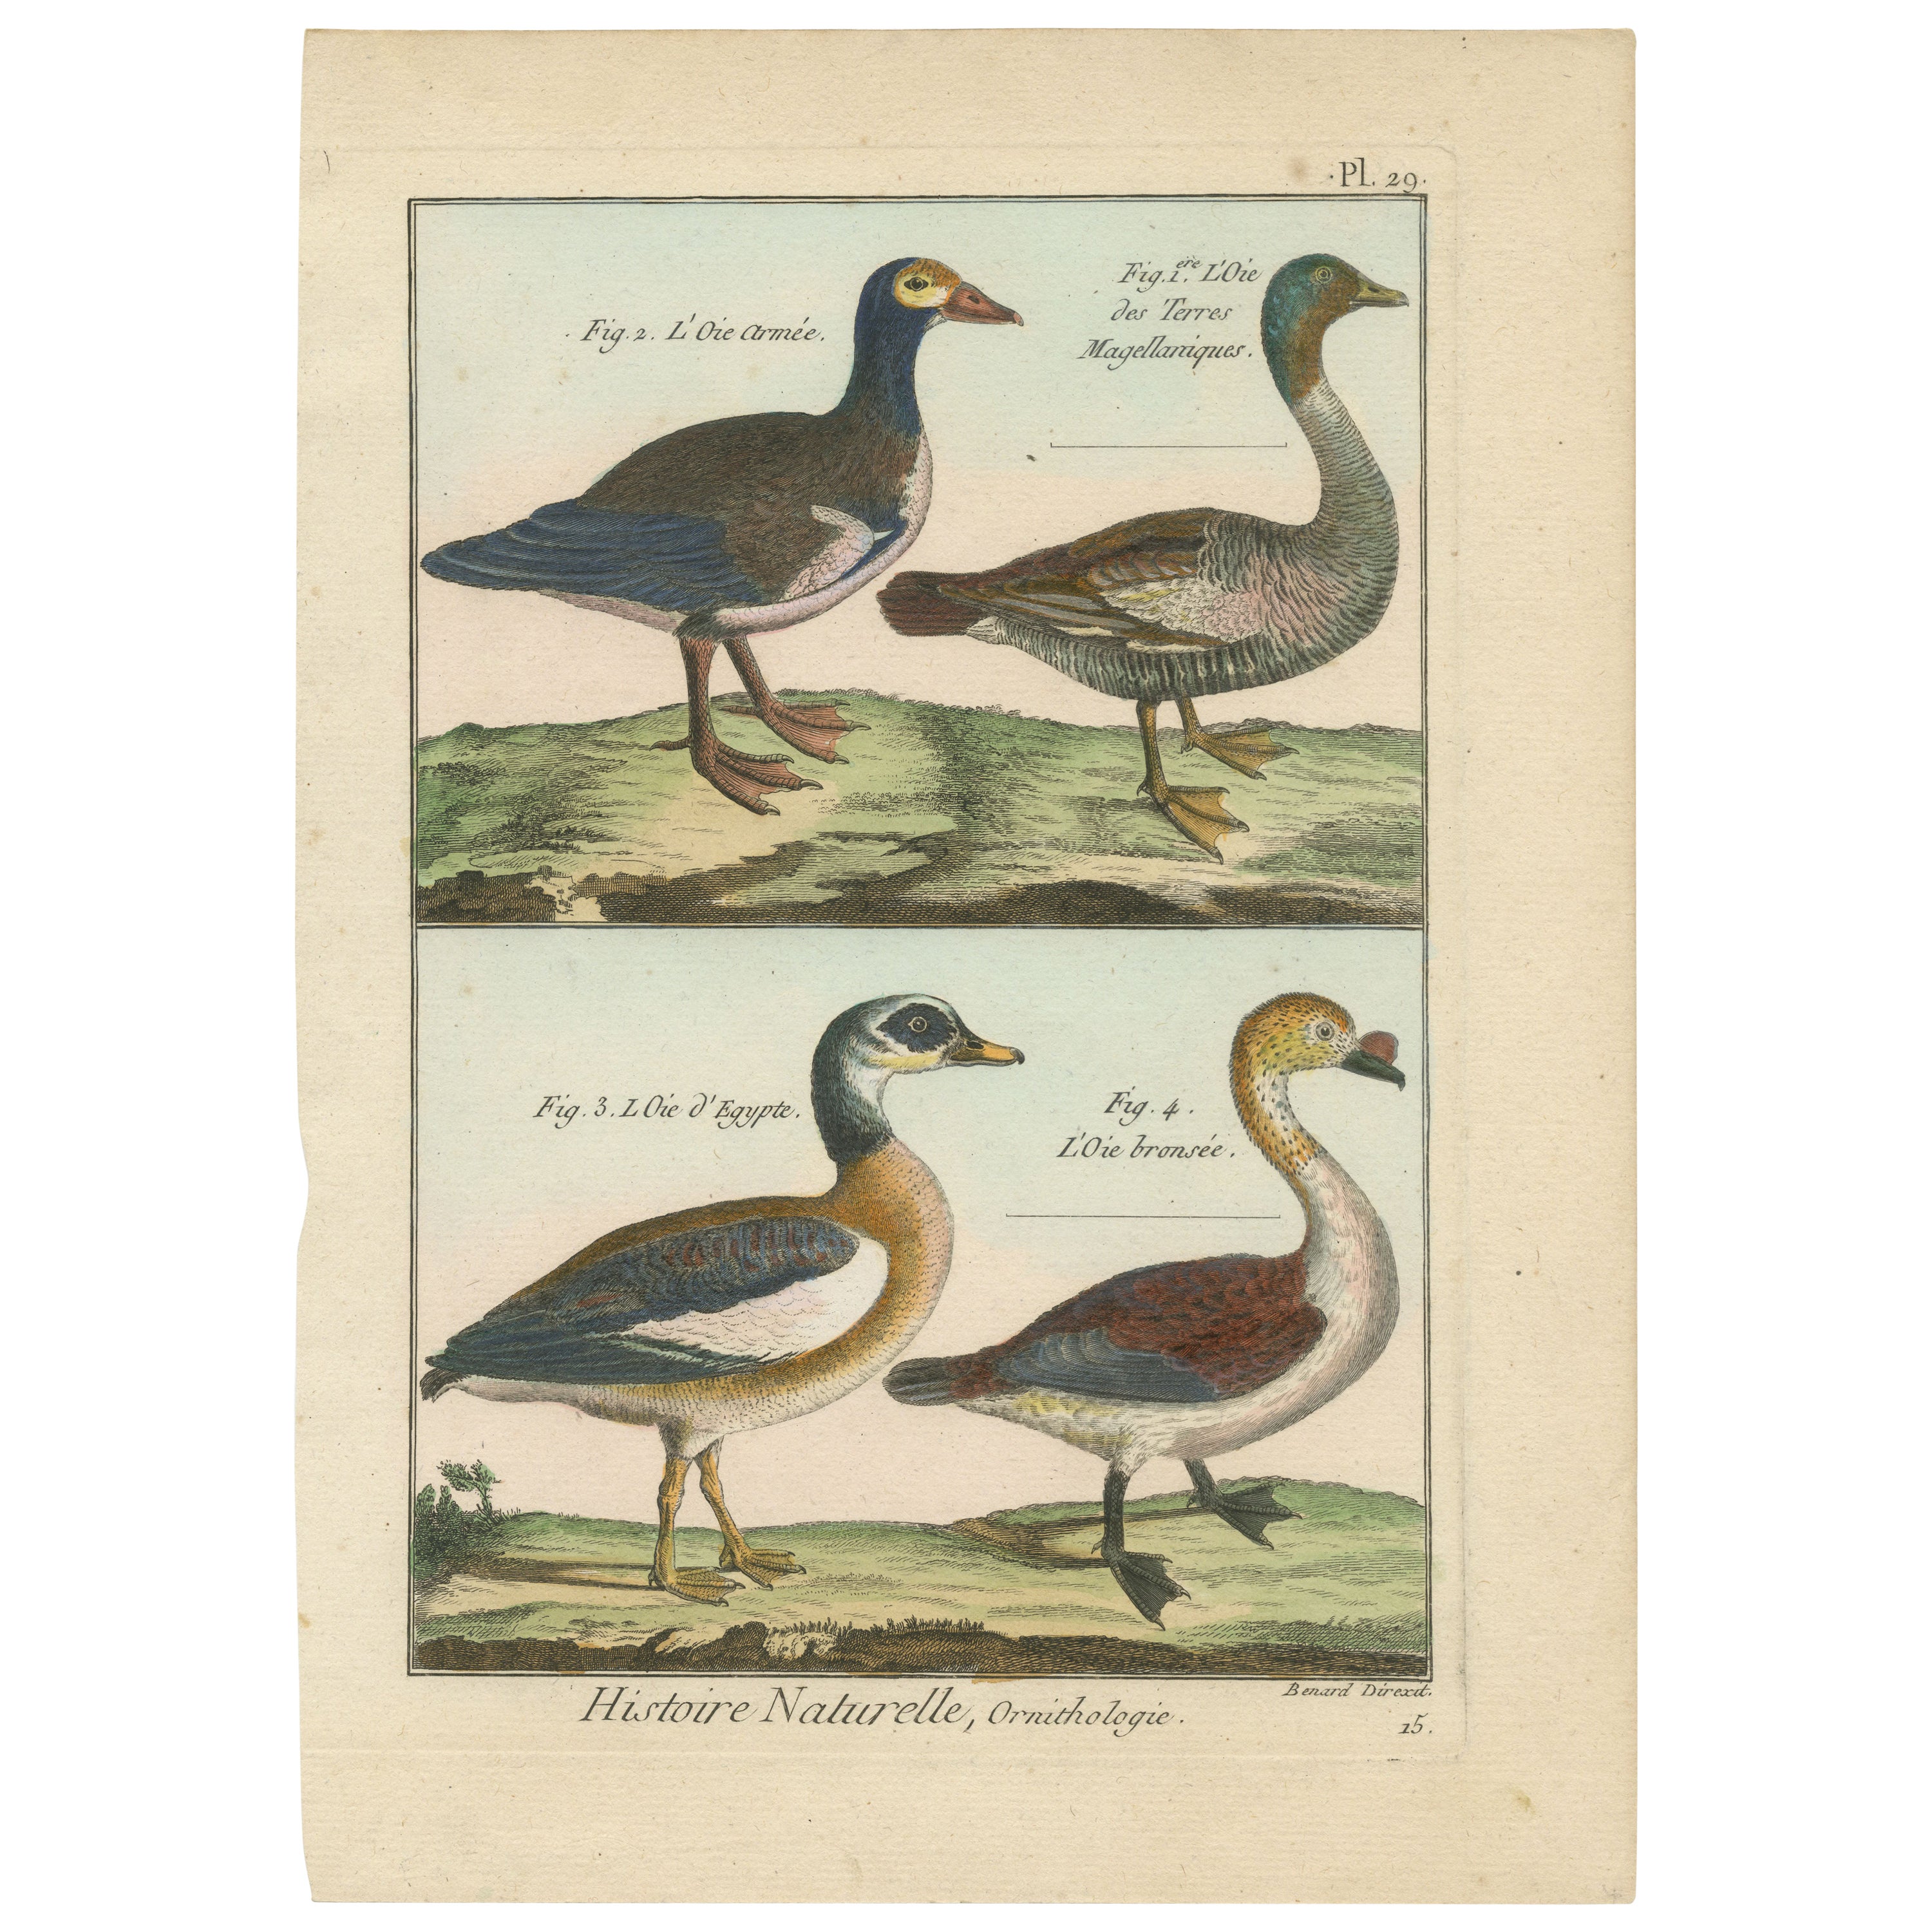 Richly Hand-Colored, Authentic Copper Engraving of 4 Geese (1792)